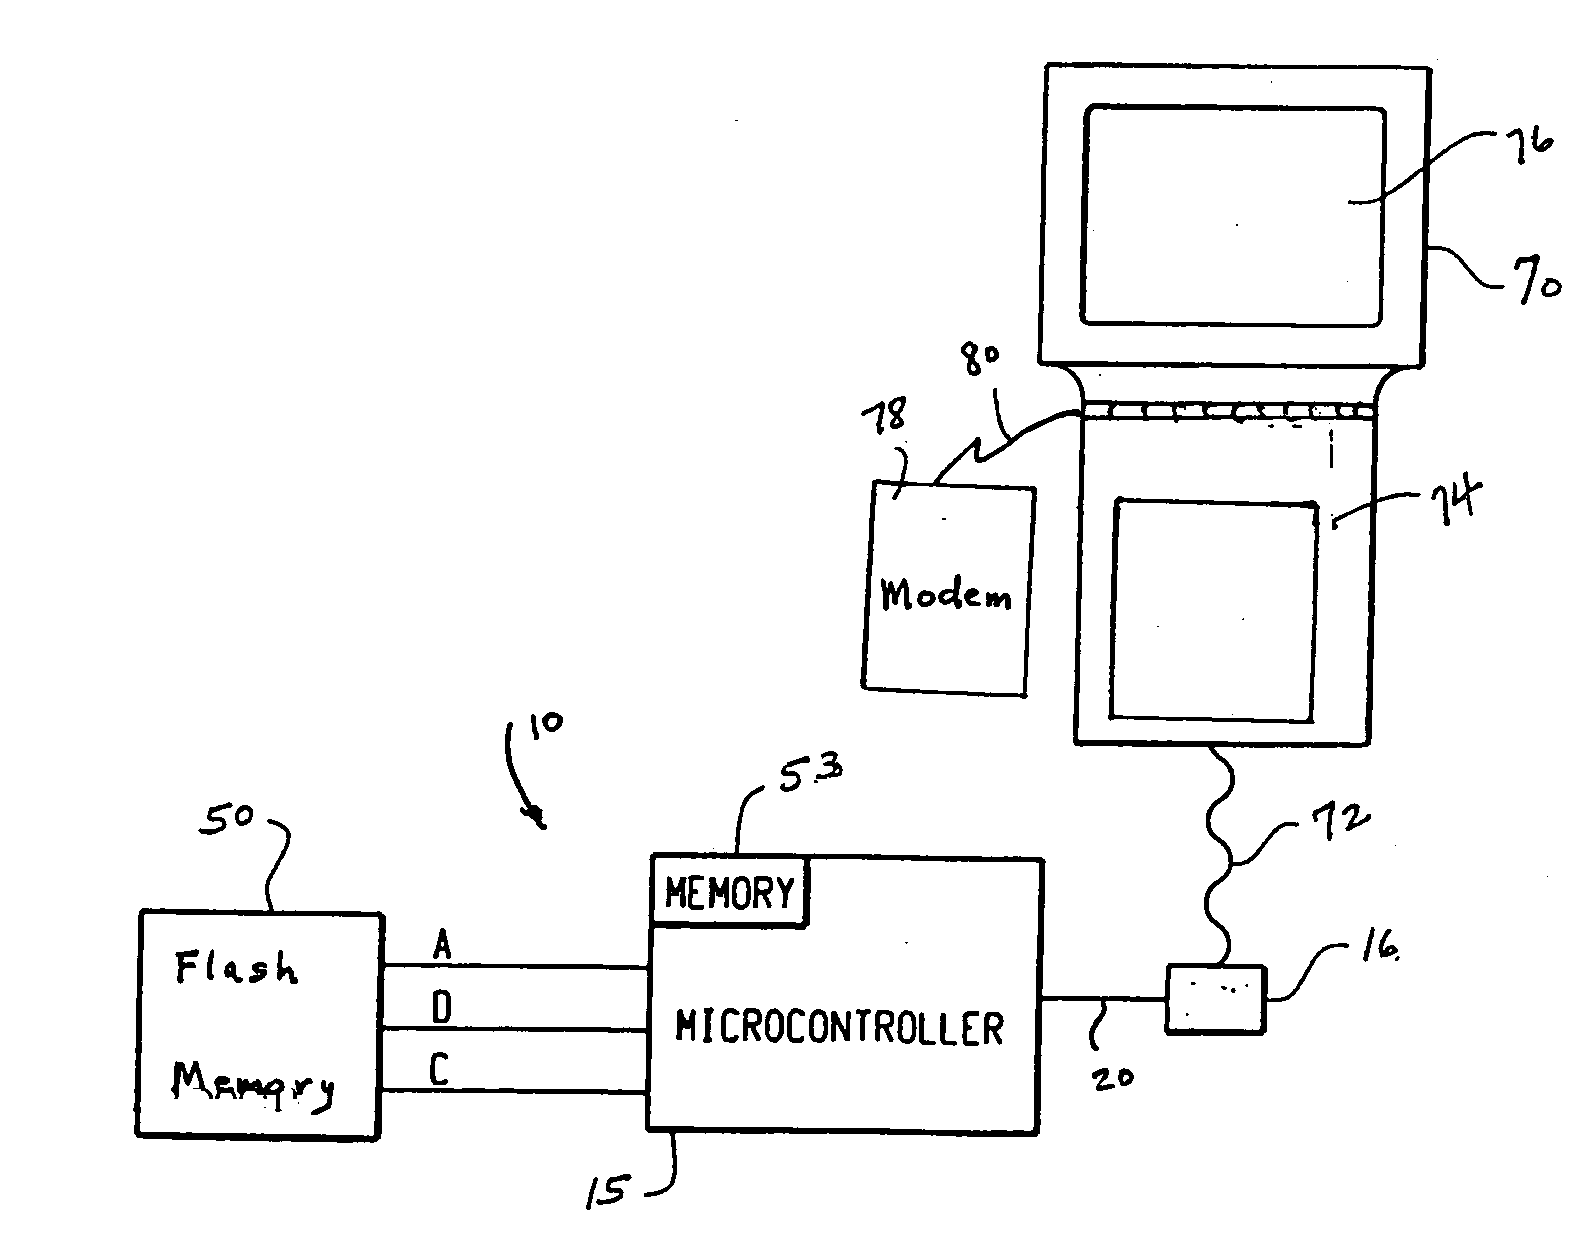 Method and apparatus for reprogramming a programmed controller of a power driven wheelchair